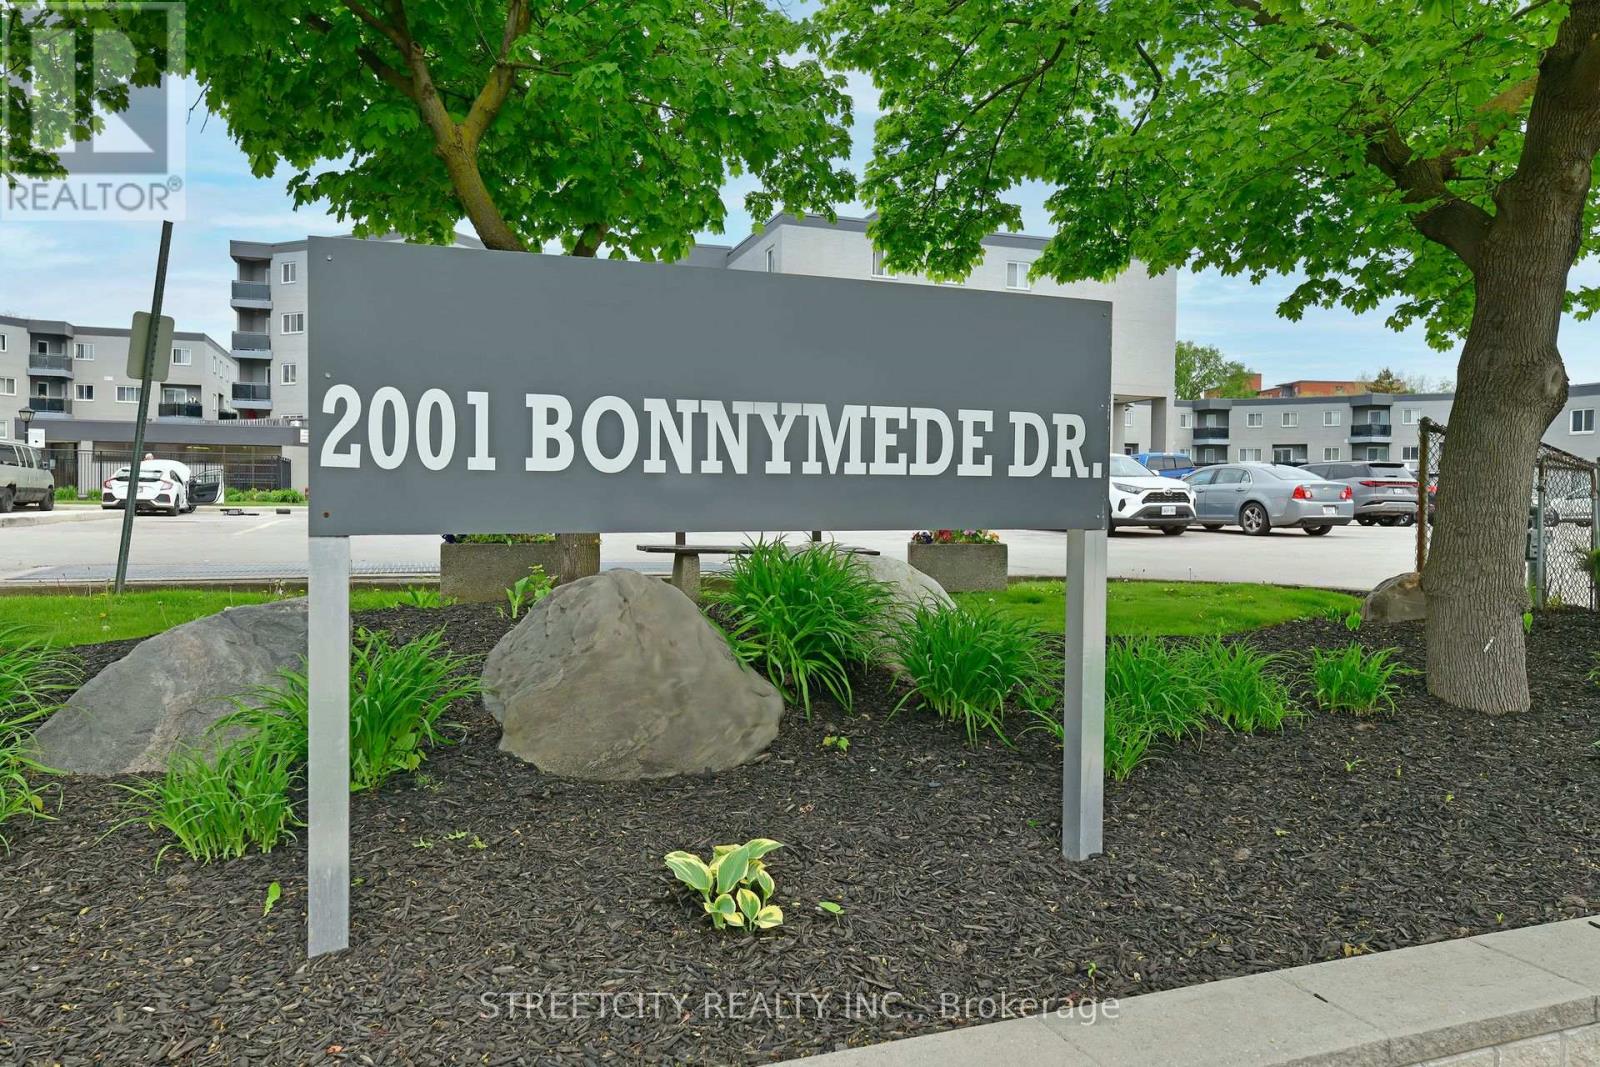 140 - 2001 BONNYMEDE DRIVE square one condos for sale Square One Condos For Sale 26861463 LargePhoto 1